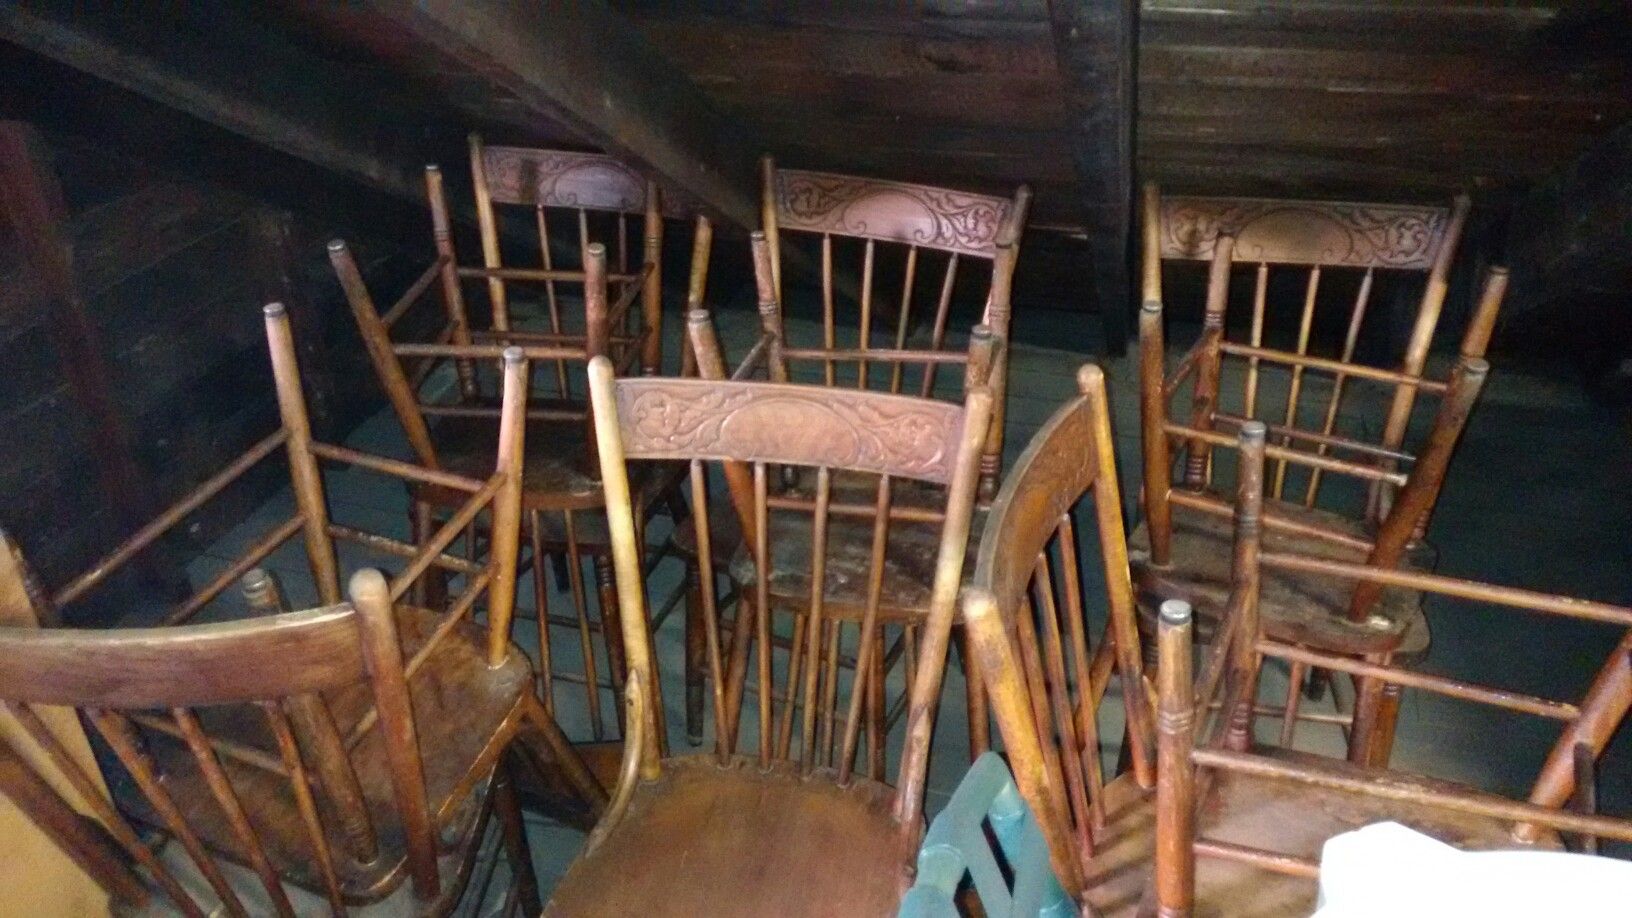 Antique chairs , quality craftsmanship.Wow only $7.00 a piece . There are 10 available